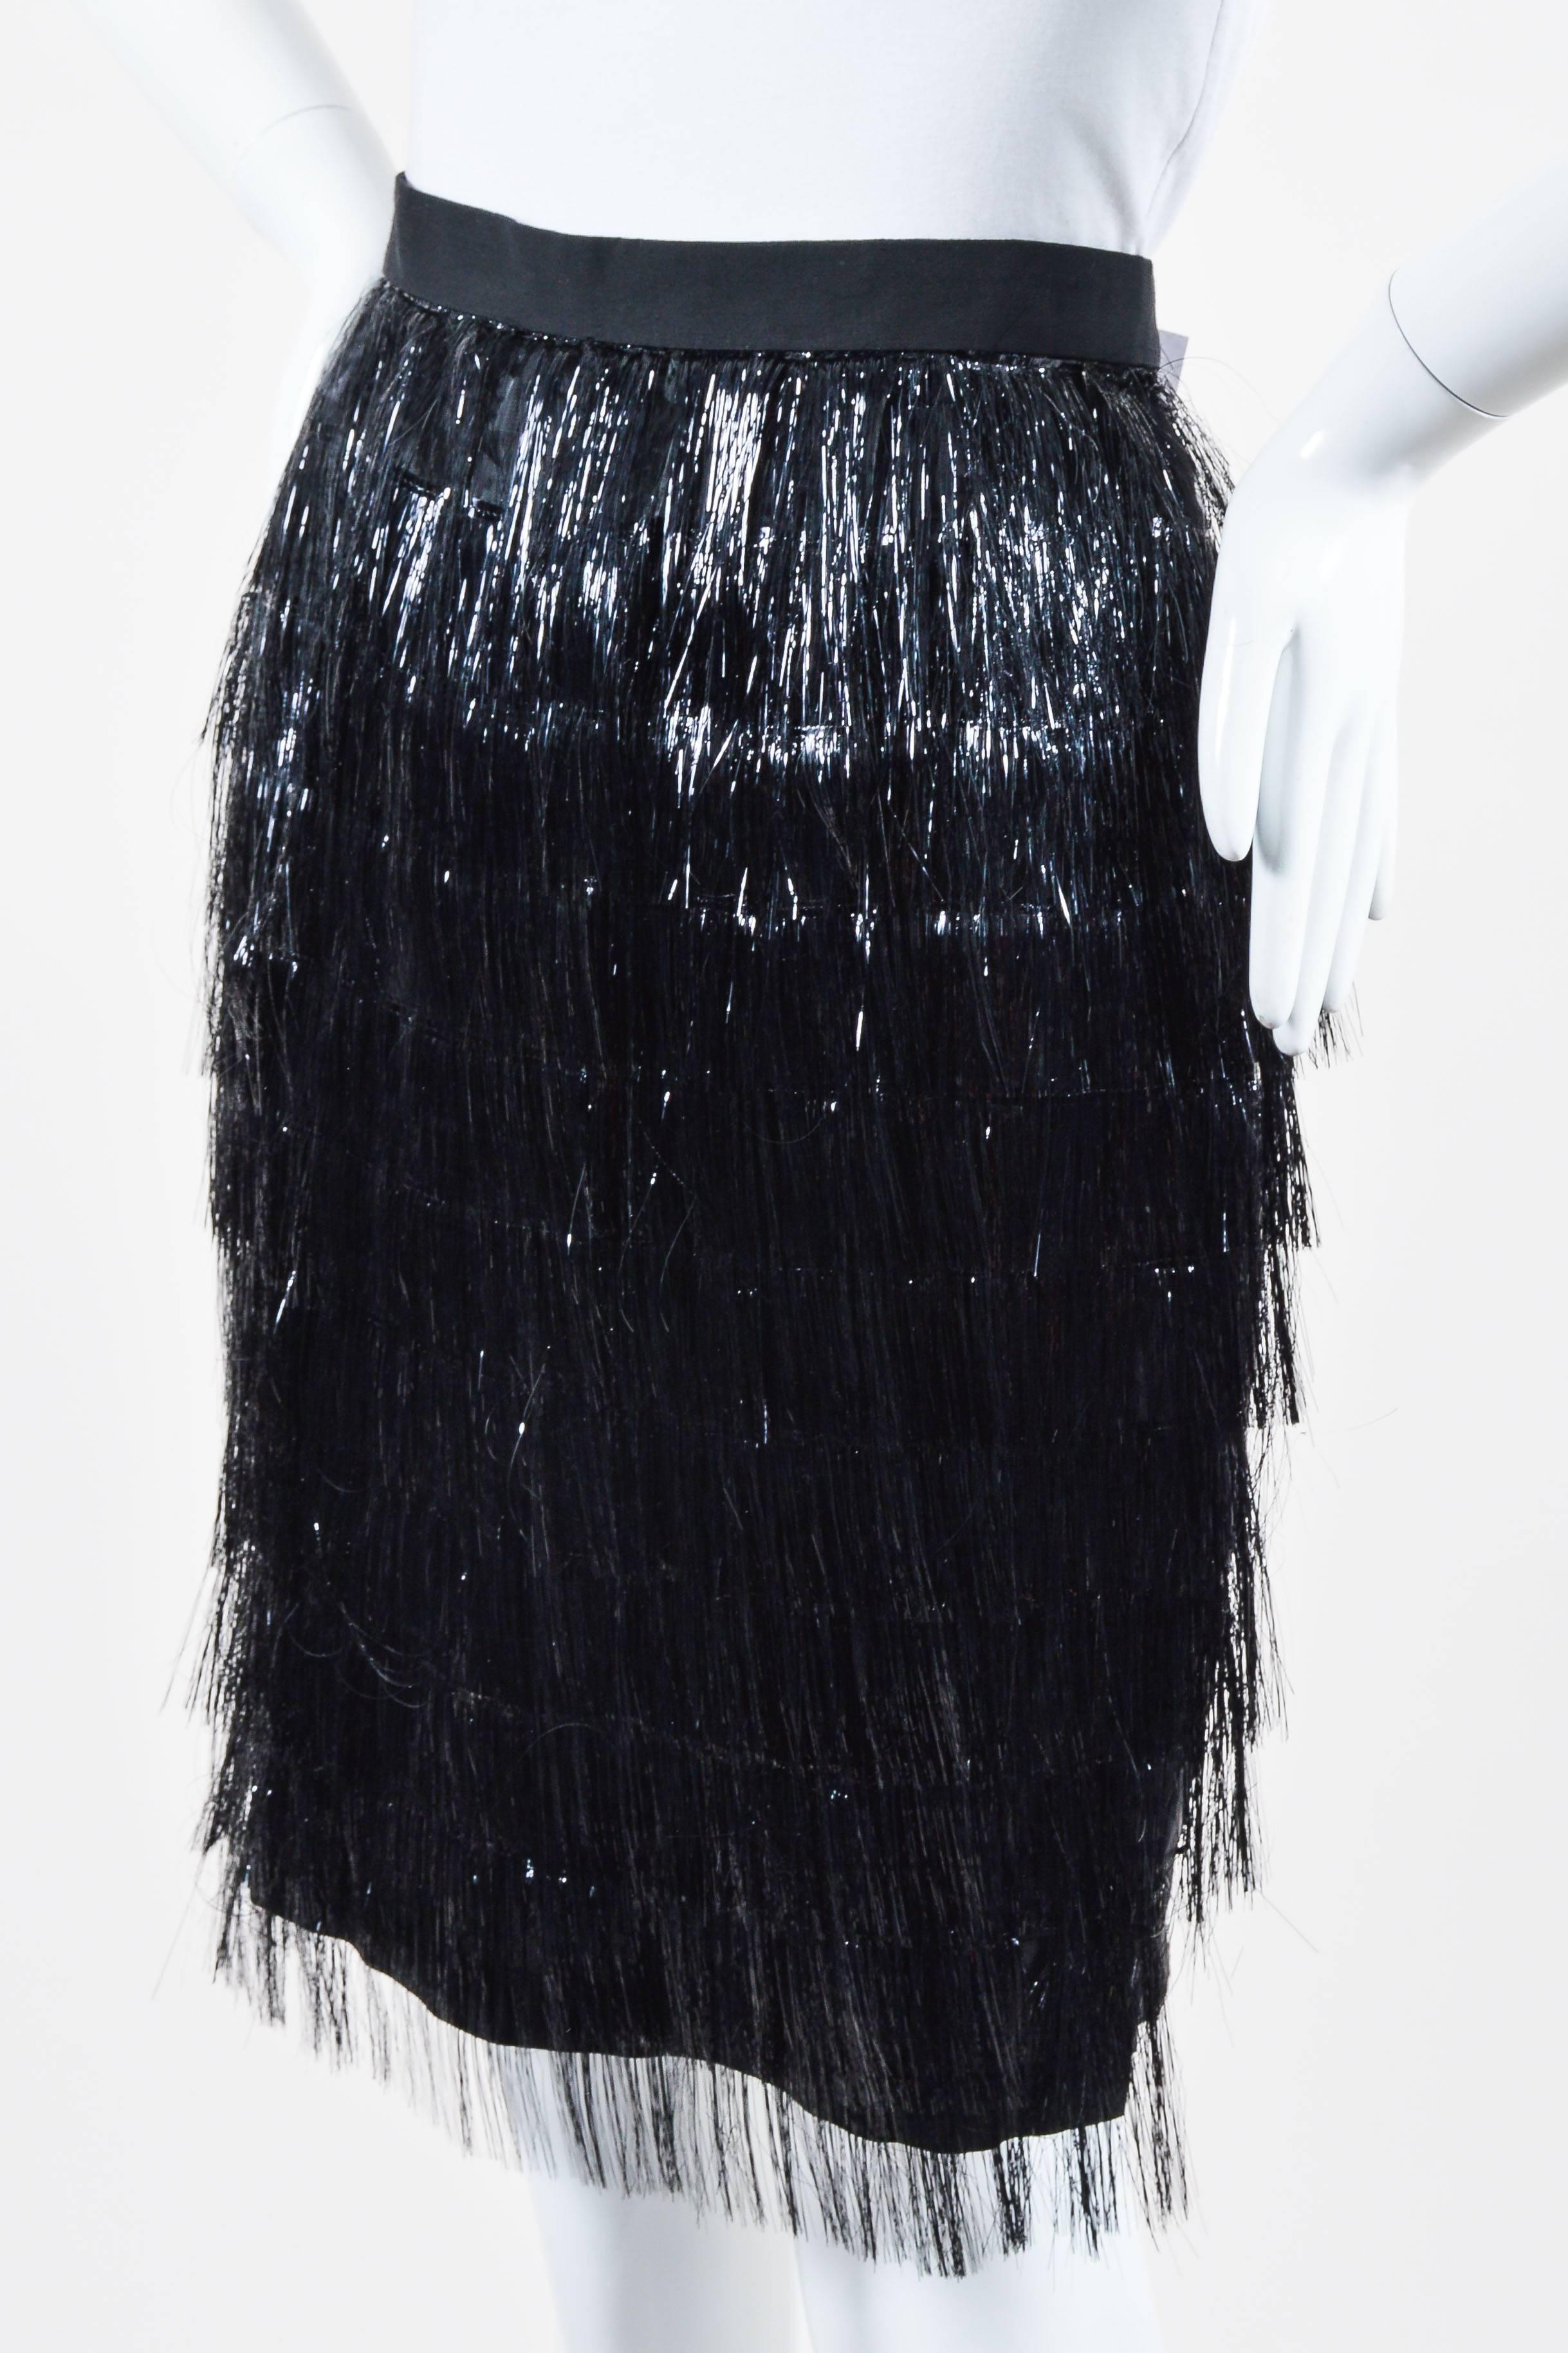 Retails at $1625. Fun and flirty party skirt for a stylish night out on the town. Silk blend textile. Front tiered tinsel fringe embellishment. Hits at knees. Small slit at back. Hidden back zip closure with hook-and-eye closure.